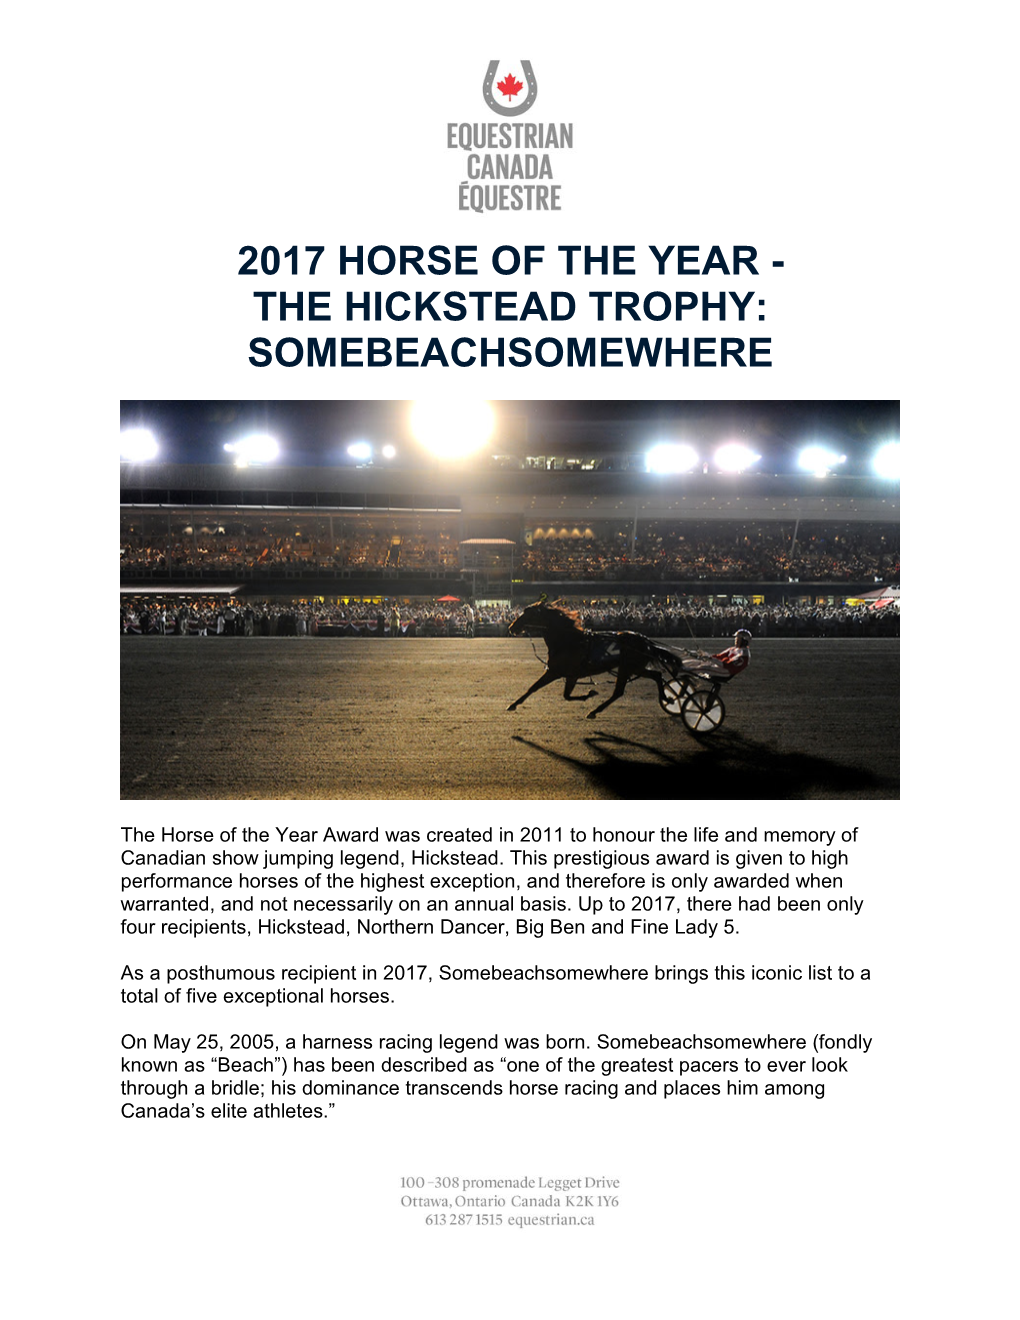 2017 Horse of the Year - the Hickstead Trophy: Somebeachsomewhere